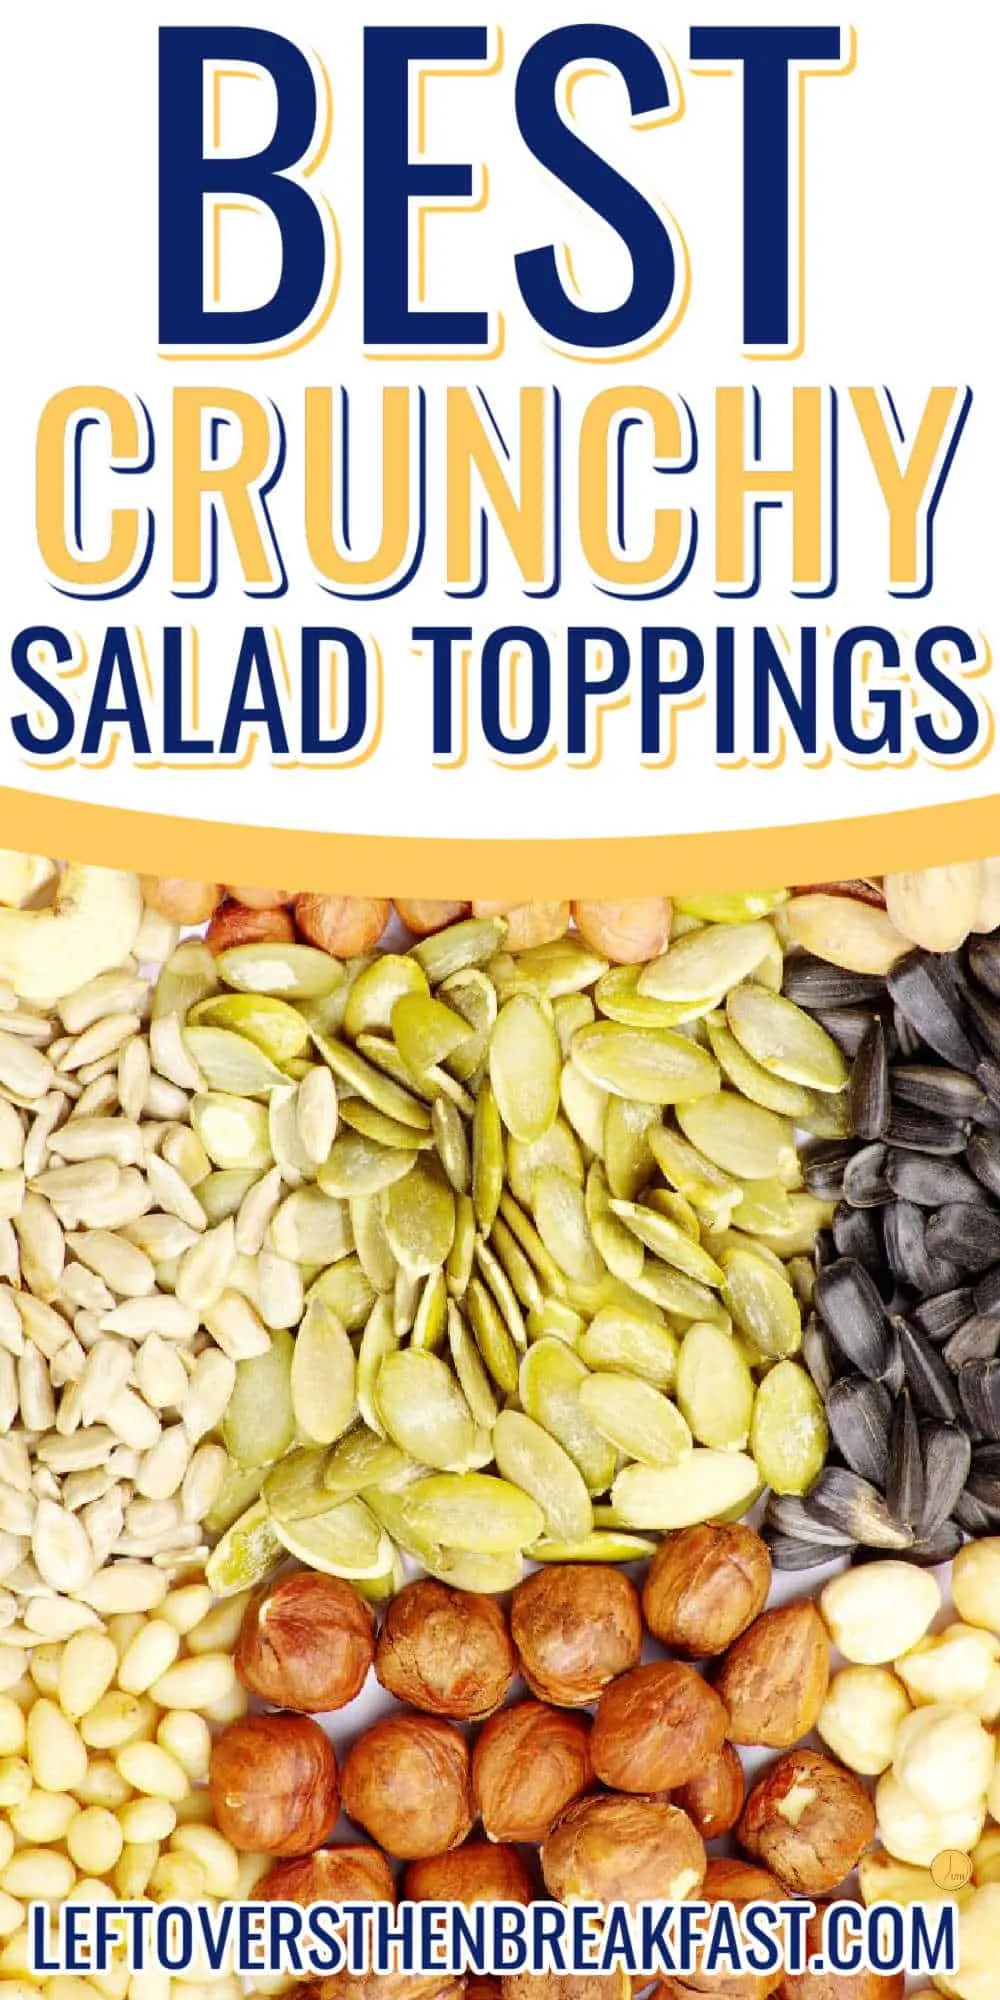 seeds and nuts with white banned and text "best crunchy salad toppings"